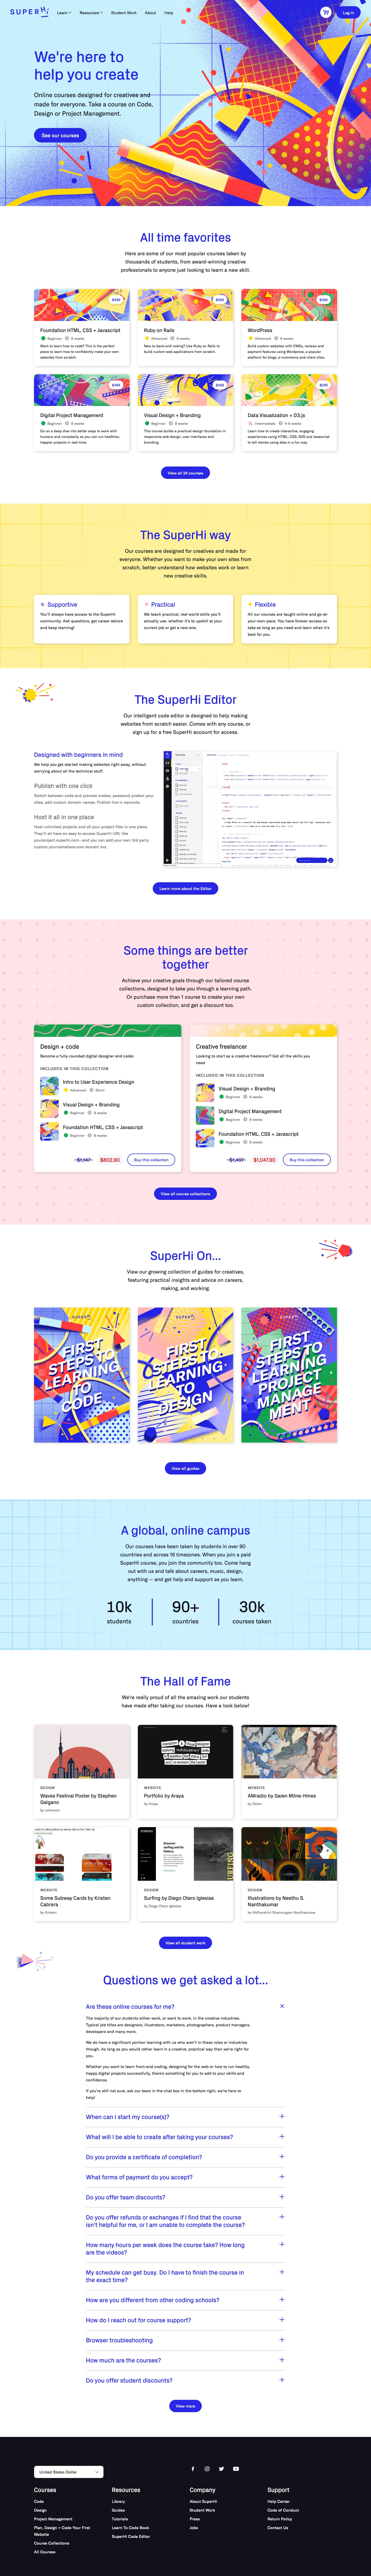 SuperHi Landing Page Example: We're here to help you create. Online courses designed for creatives and made for everyone. Take a course on Code, Design or Project Management.